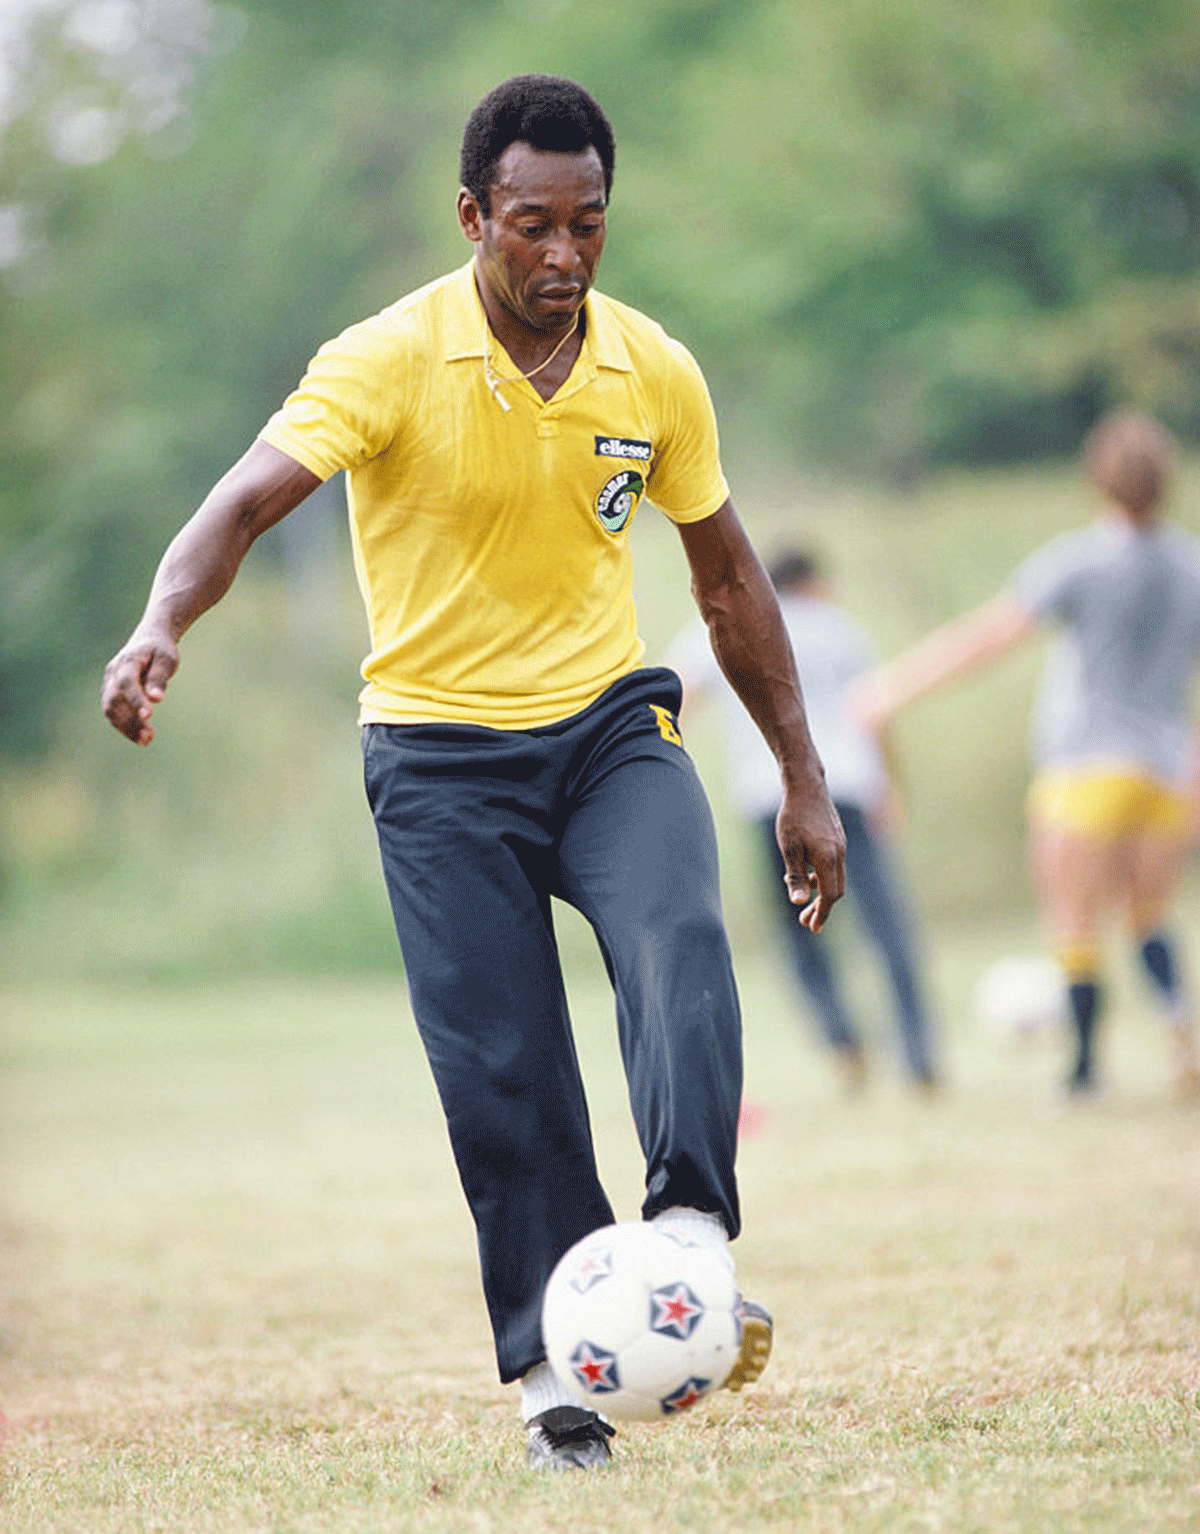 Pele of New York Cosmos in action during a training session circa 1977.